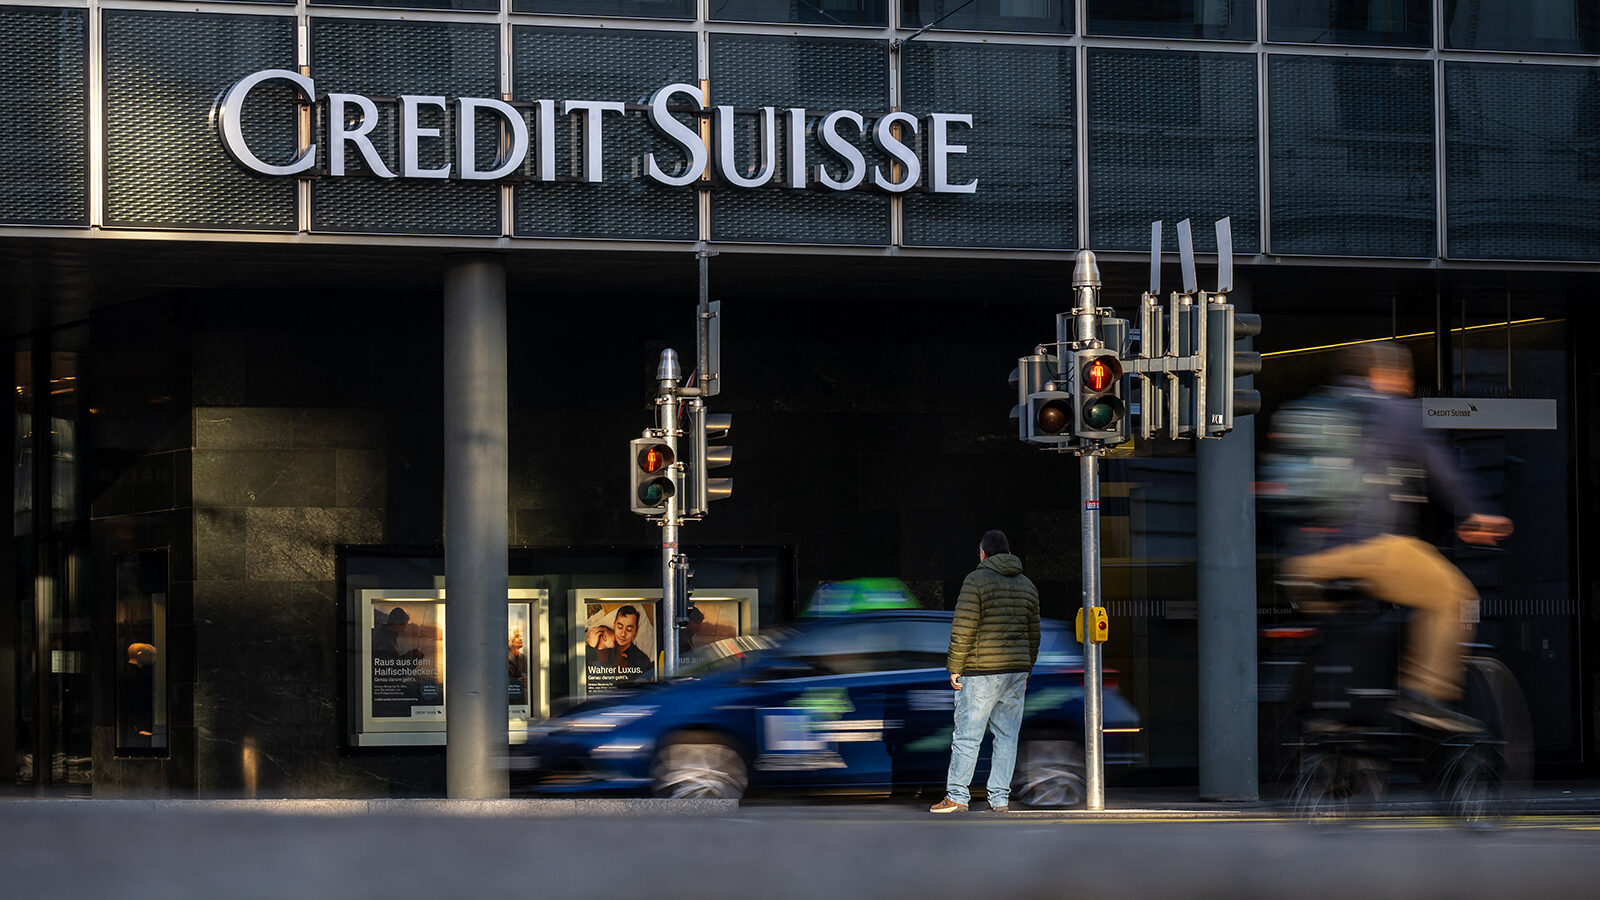 The failure of Silicon Valley Bank put increased scrutiny on the long-struggling Credit Suisse. Pho...